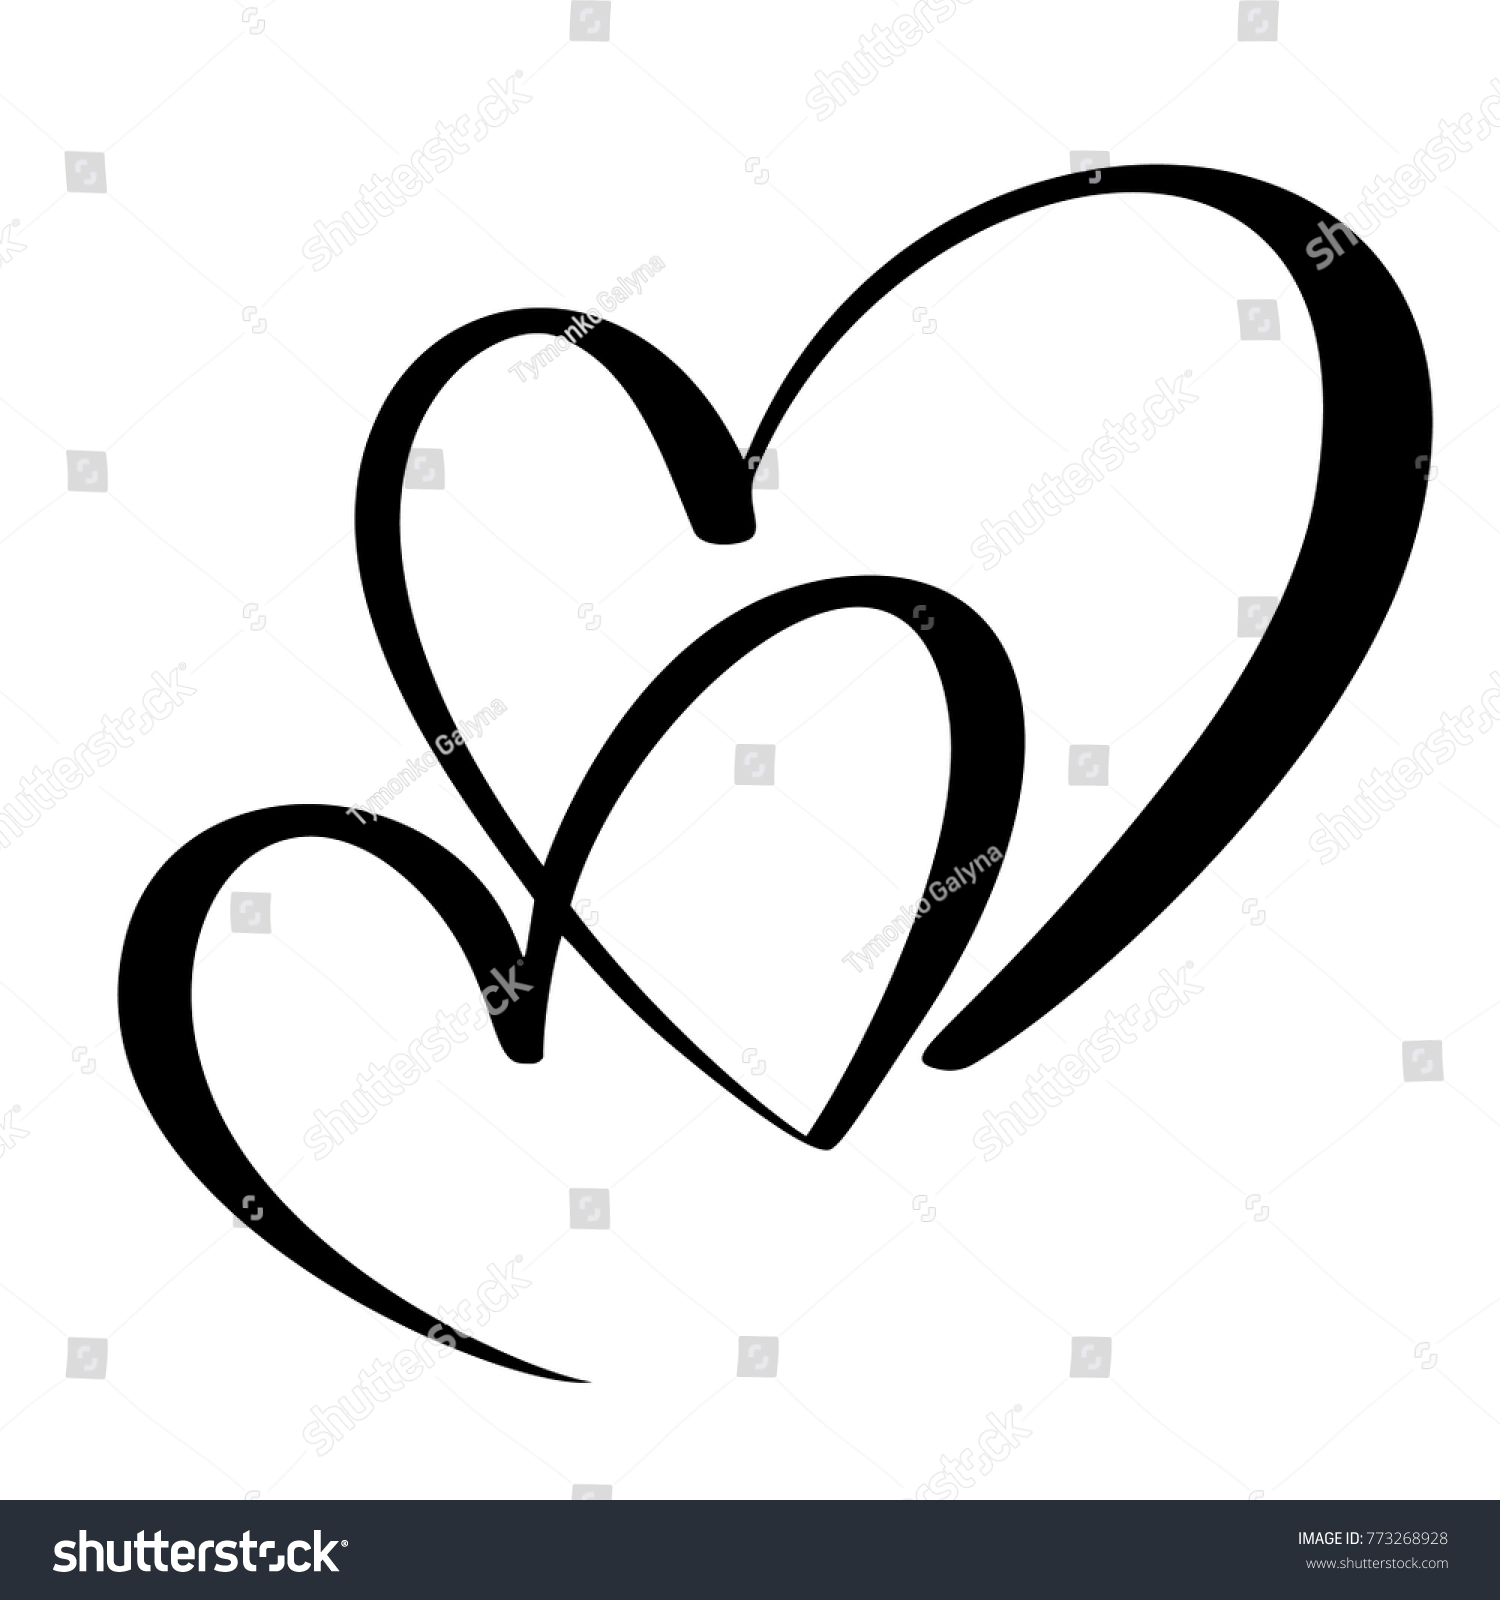 SVG of Two lovers heart. Handmade vector calligraphy. Decor for greeting card, mug, photo overlays, t-shirt print, flyer, poster design svg